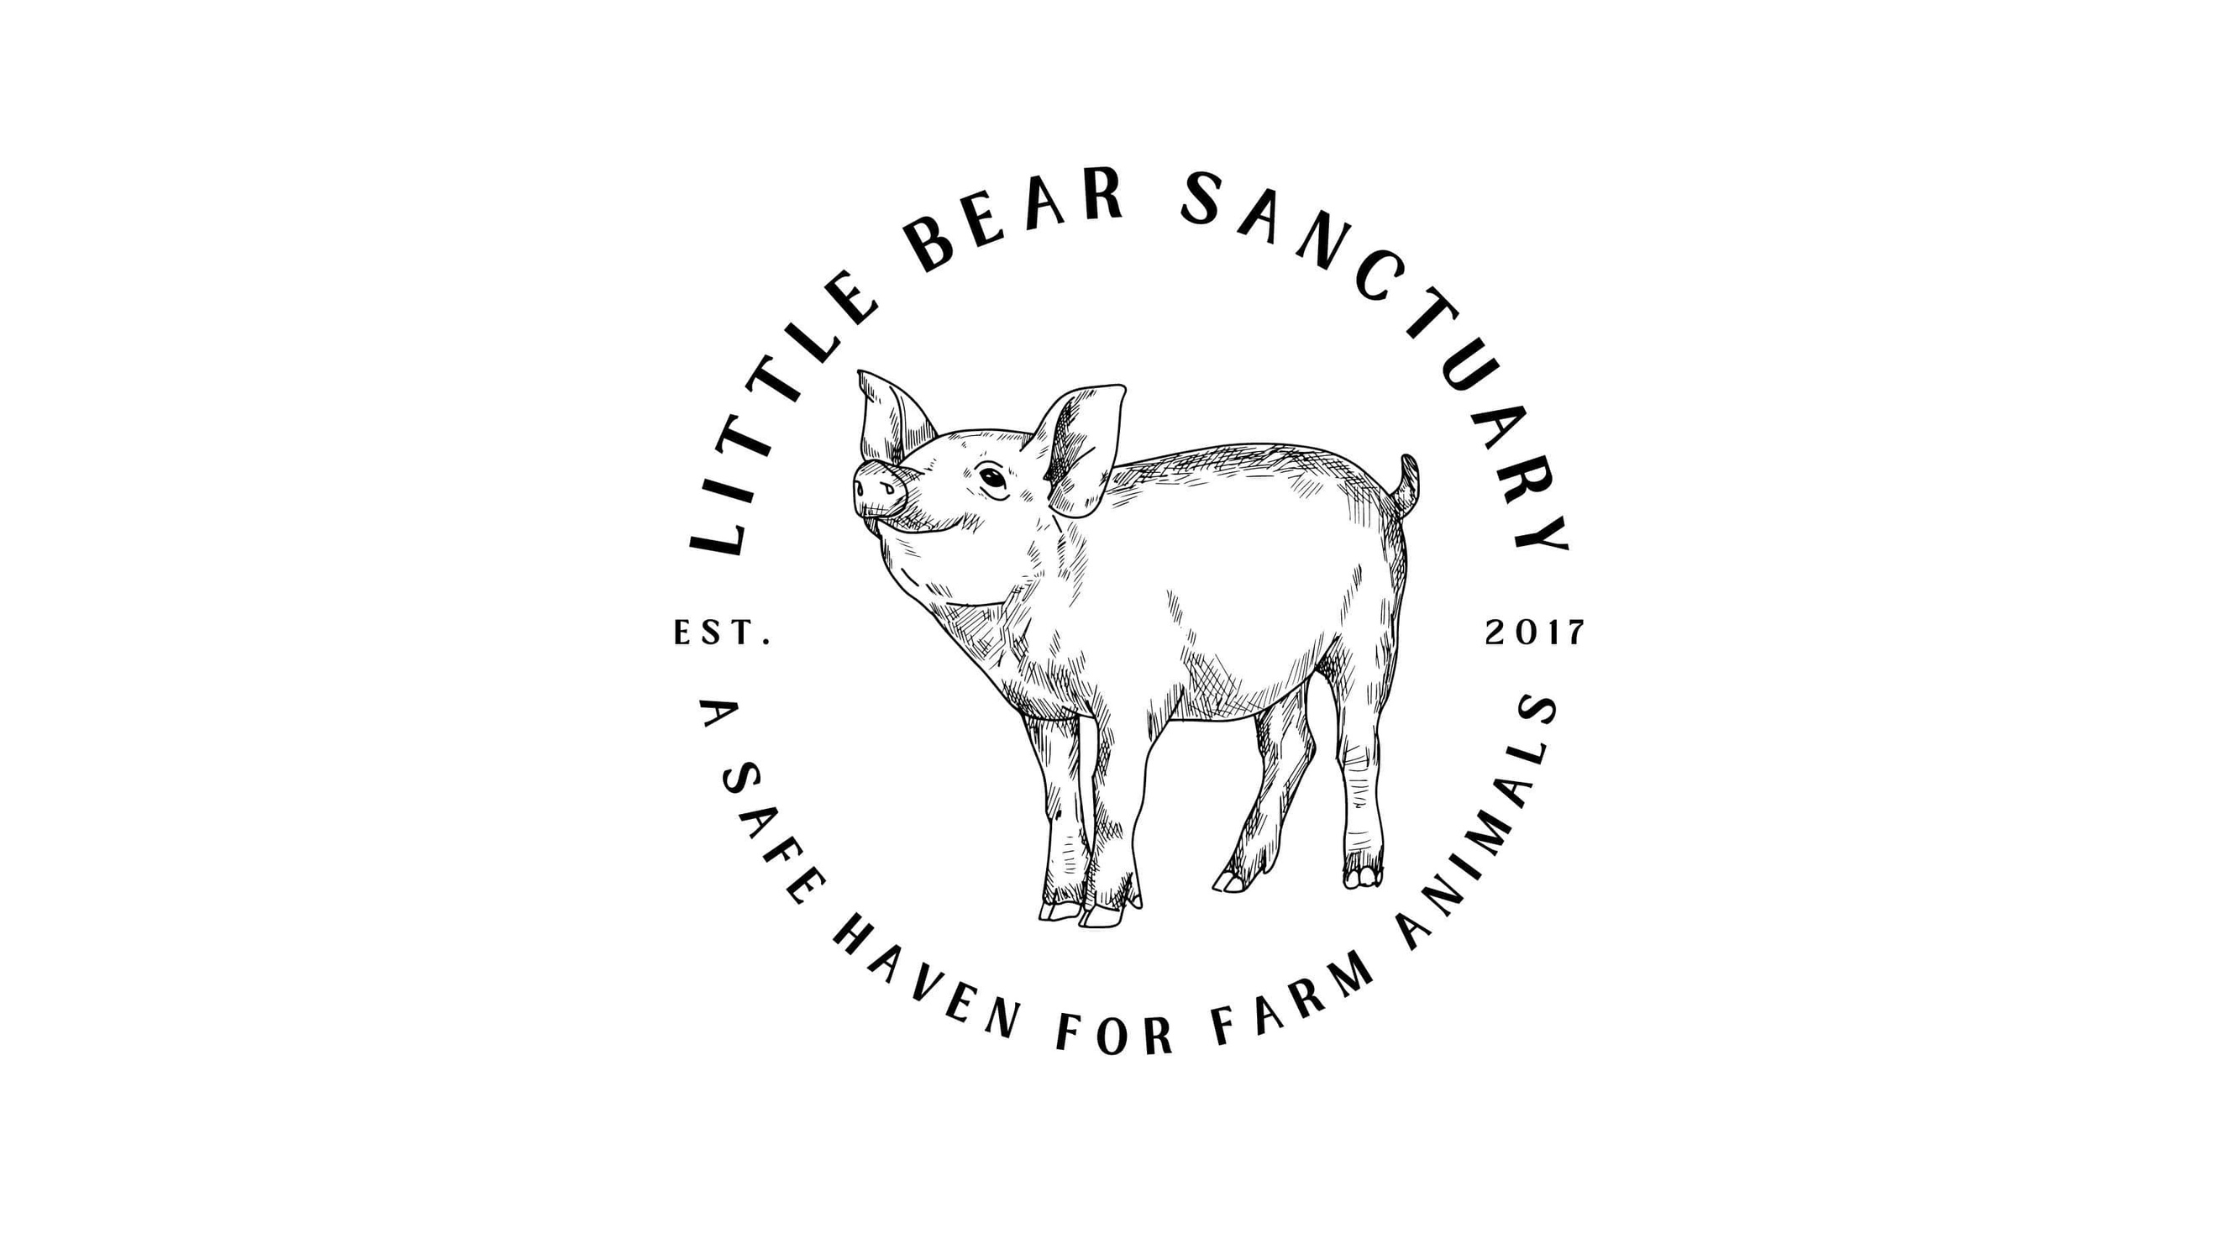 Live from Little Bear Sanctuary Special Guest: Suveria Mota